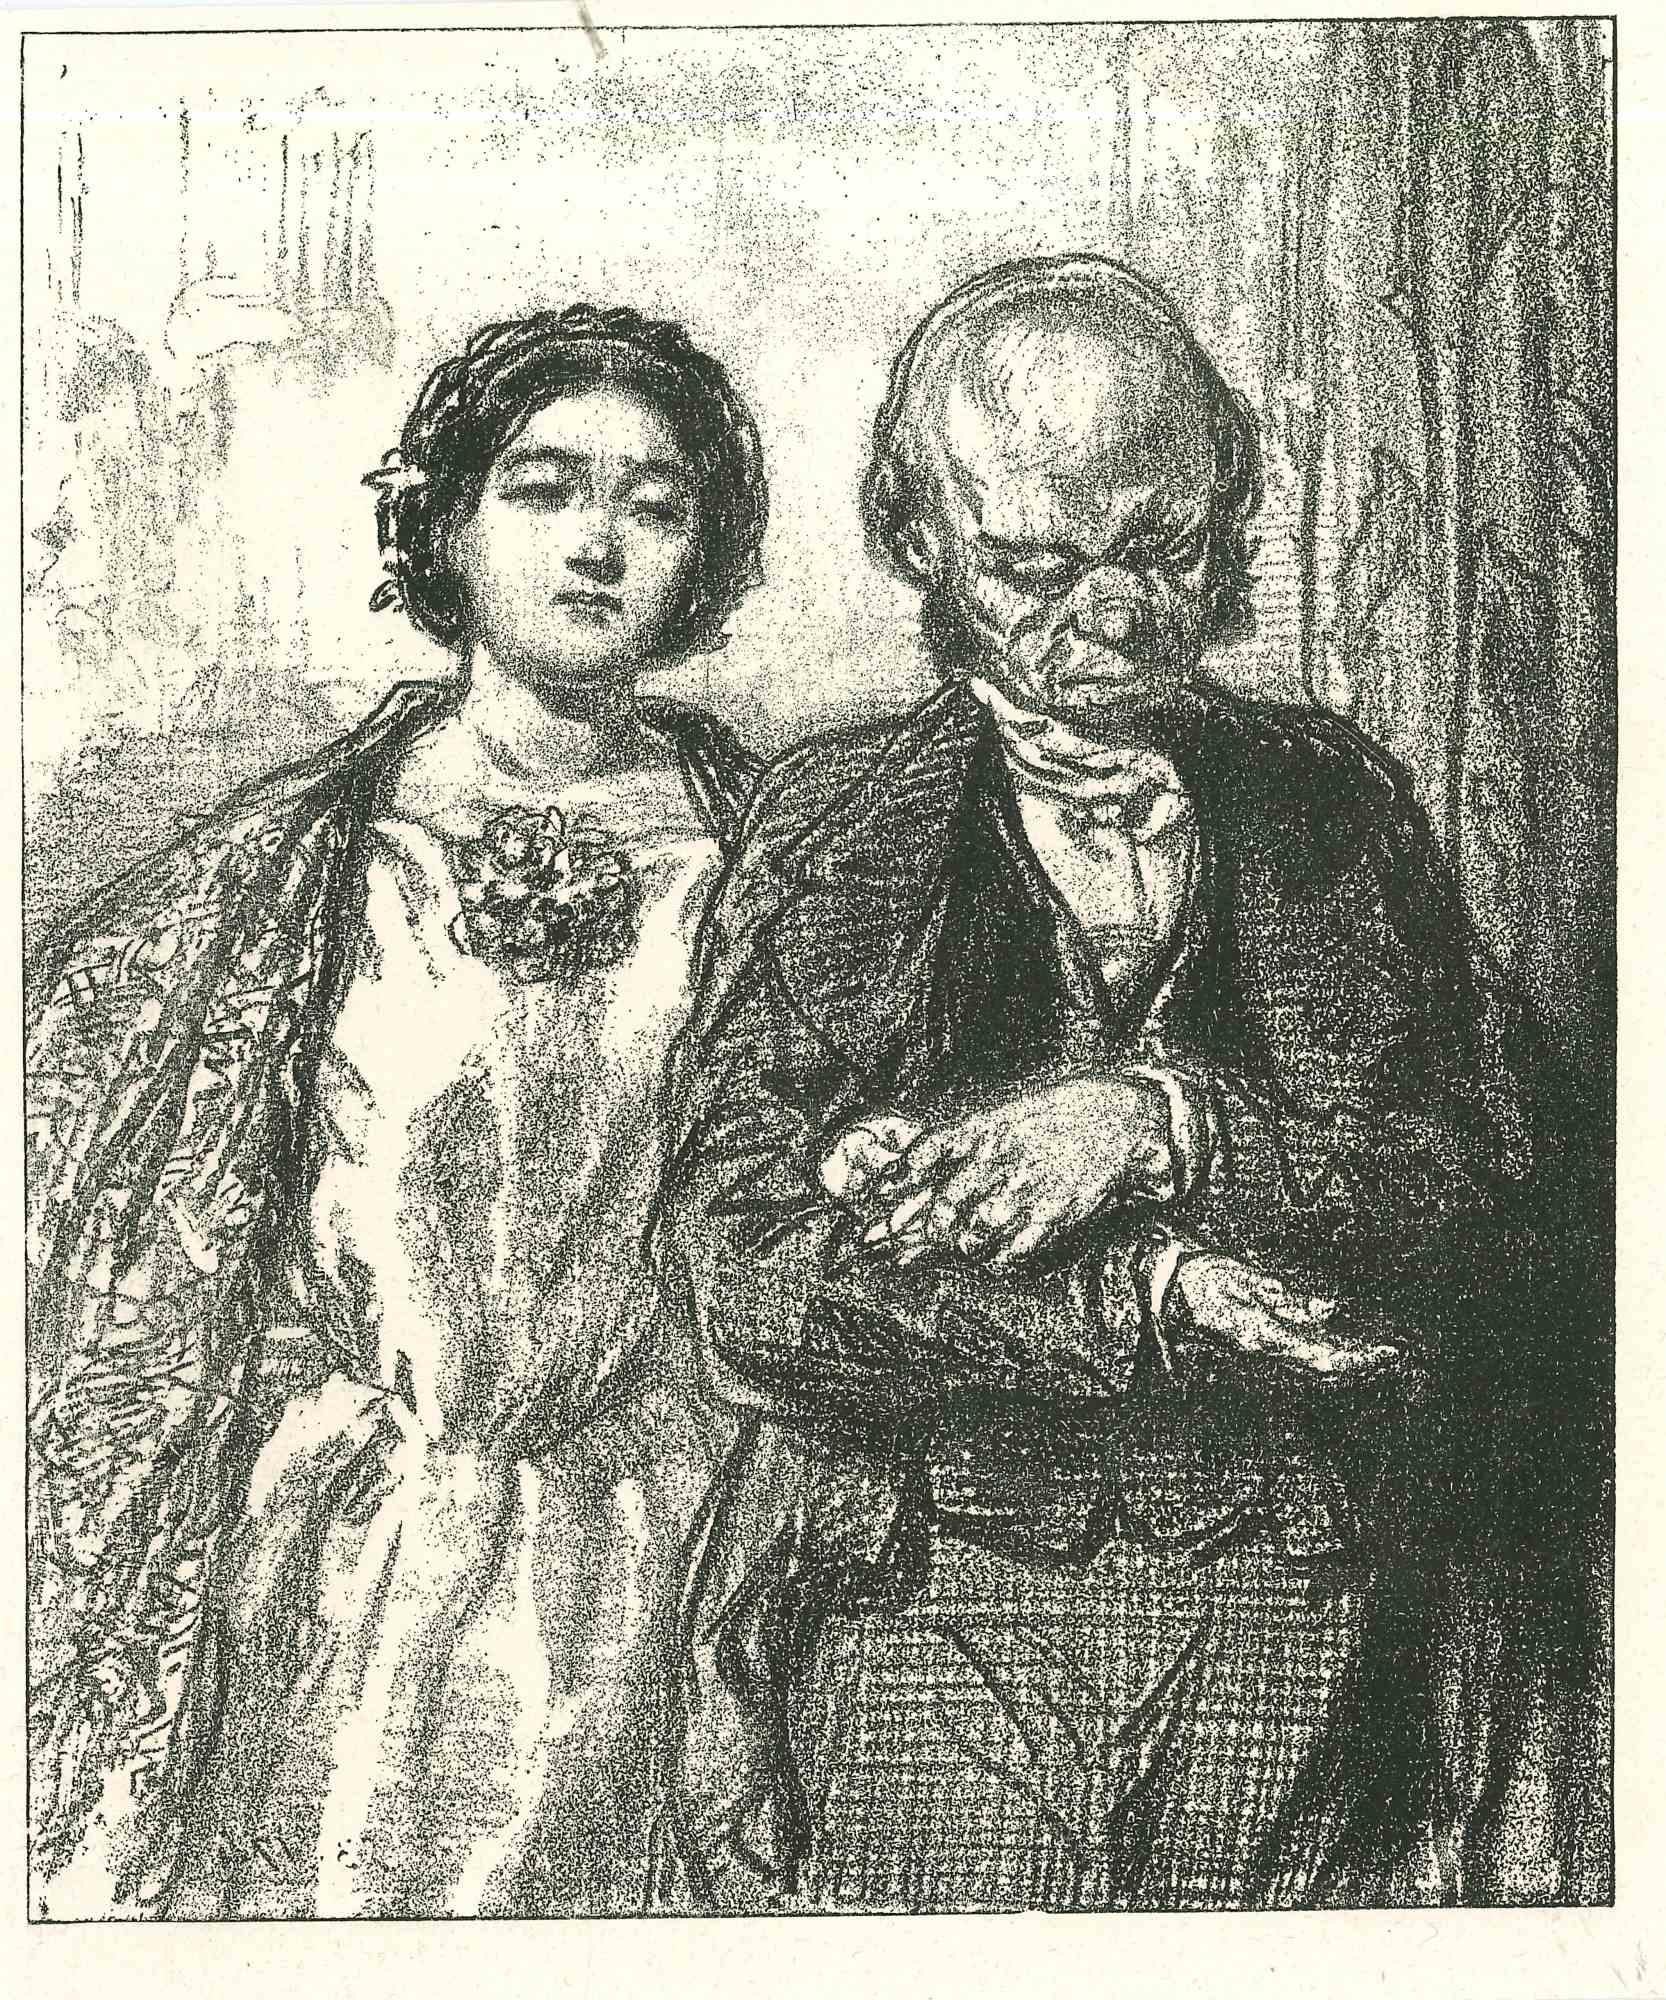 The companionship is an original lithograph on ivory-colored paper, realized by the French draftsman Paul Gavarni (after) (alias Guillaume Sulpice Chevalier Gavarni, 1804-1866) in Paris, 1881, in the collection of Illustrations for "La Mascarade